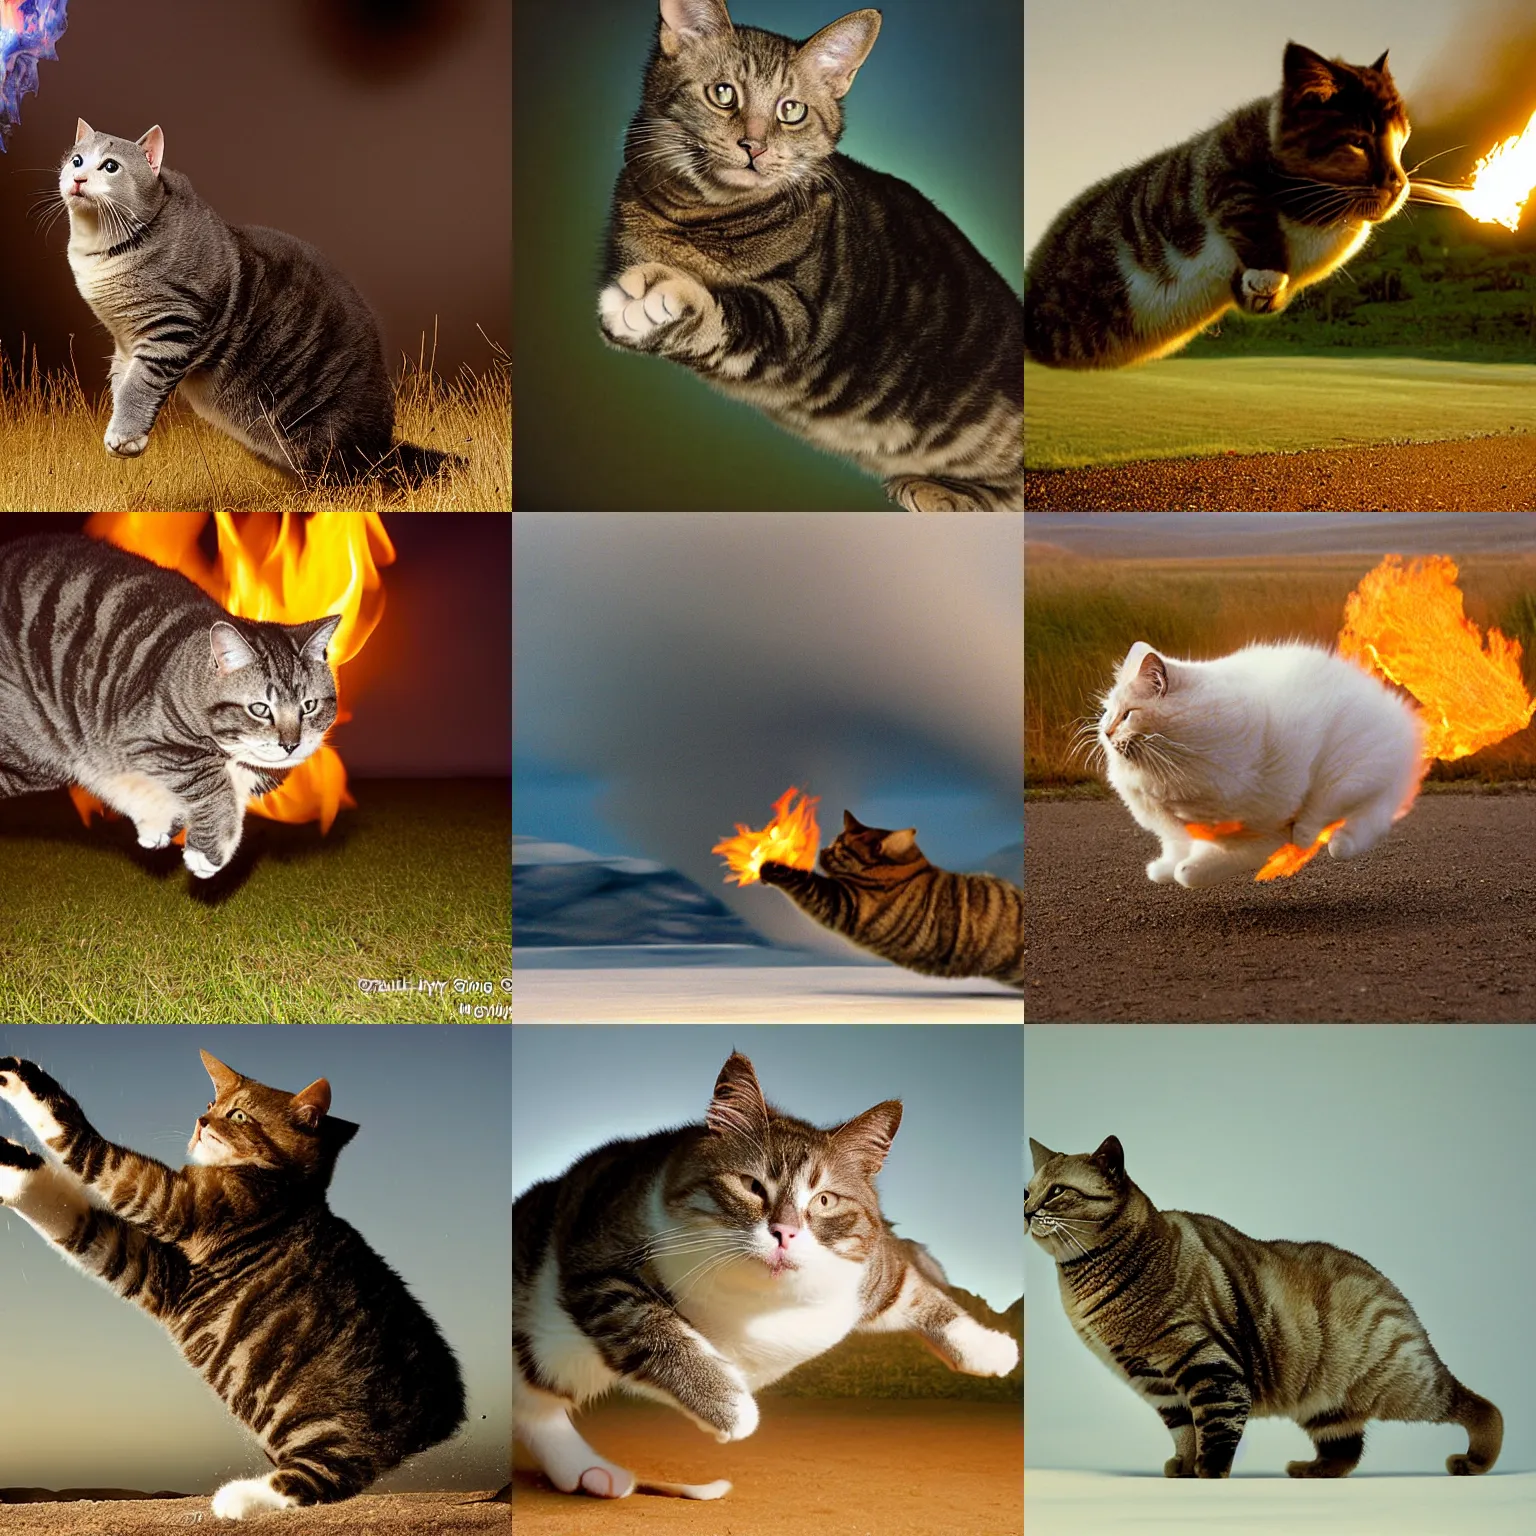 Prompt: award winning wildlife photography, a fat house cat, midair still shot, launching towards the camera at high speeds, jet propulsion, huge flame exhaust behind cat, high shutter speed, wildlife photography by Paul Nicklen, photography by Joel Sartore, photography by Skye Meaker, national geographic, perfect lighting, blurry background, bokeh